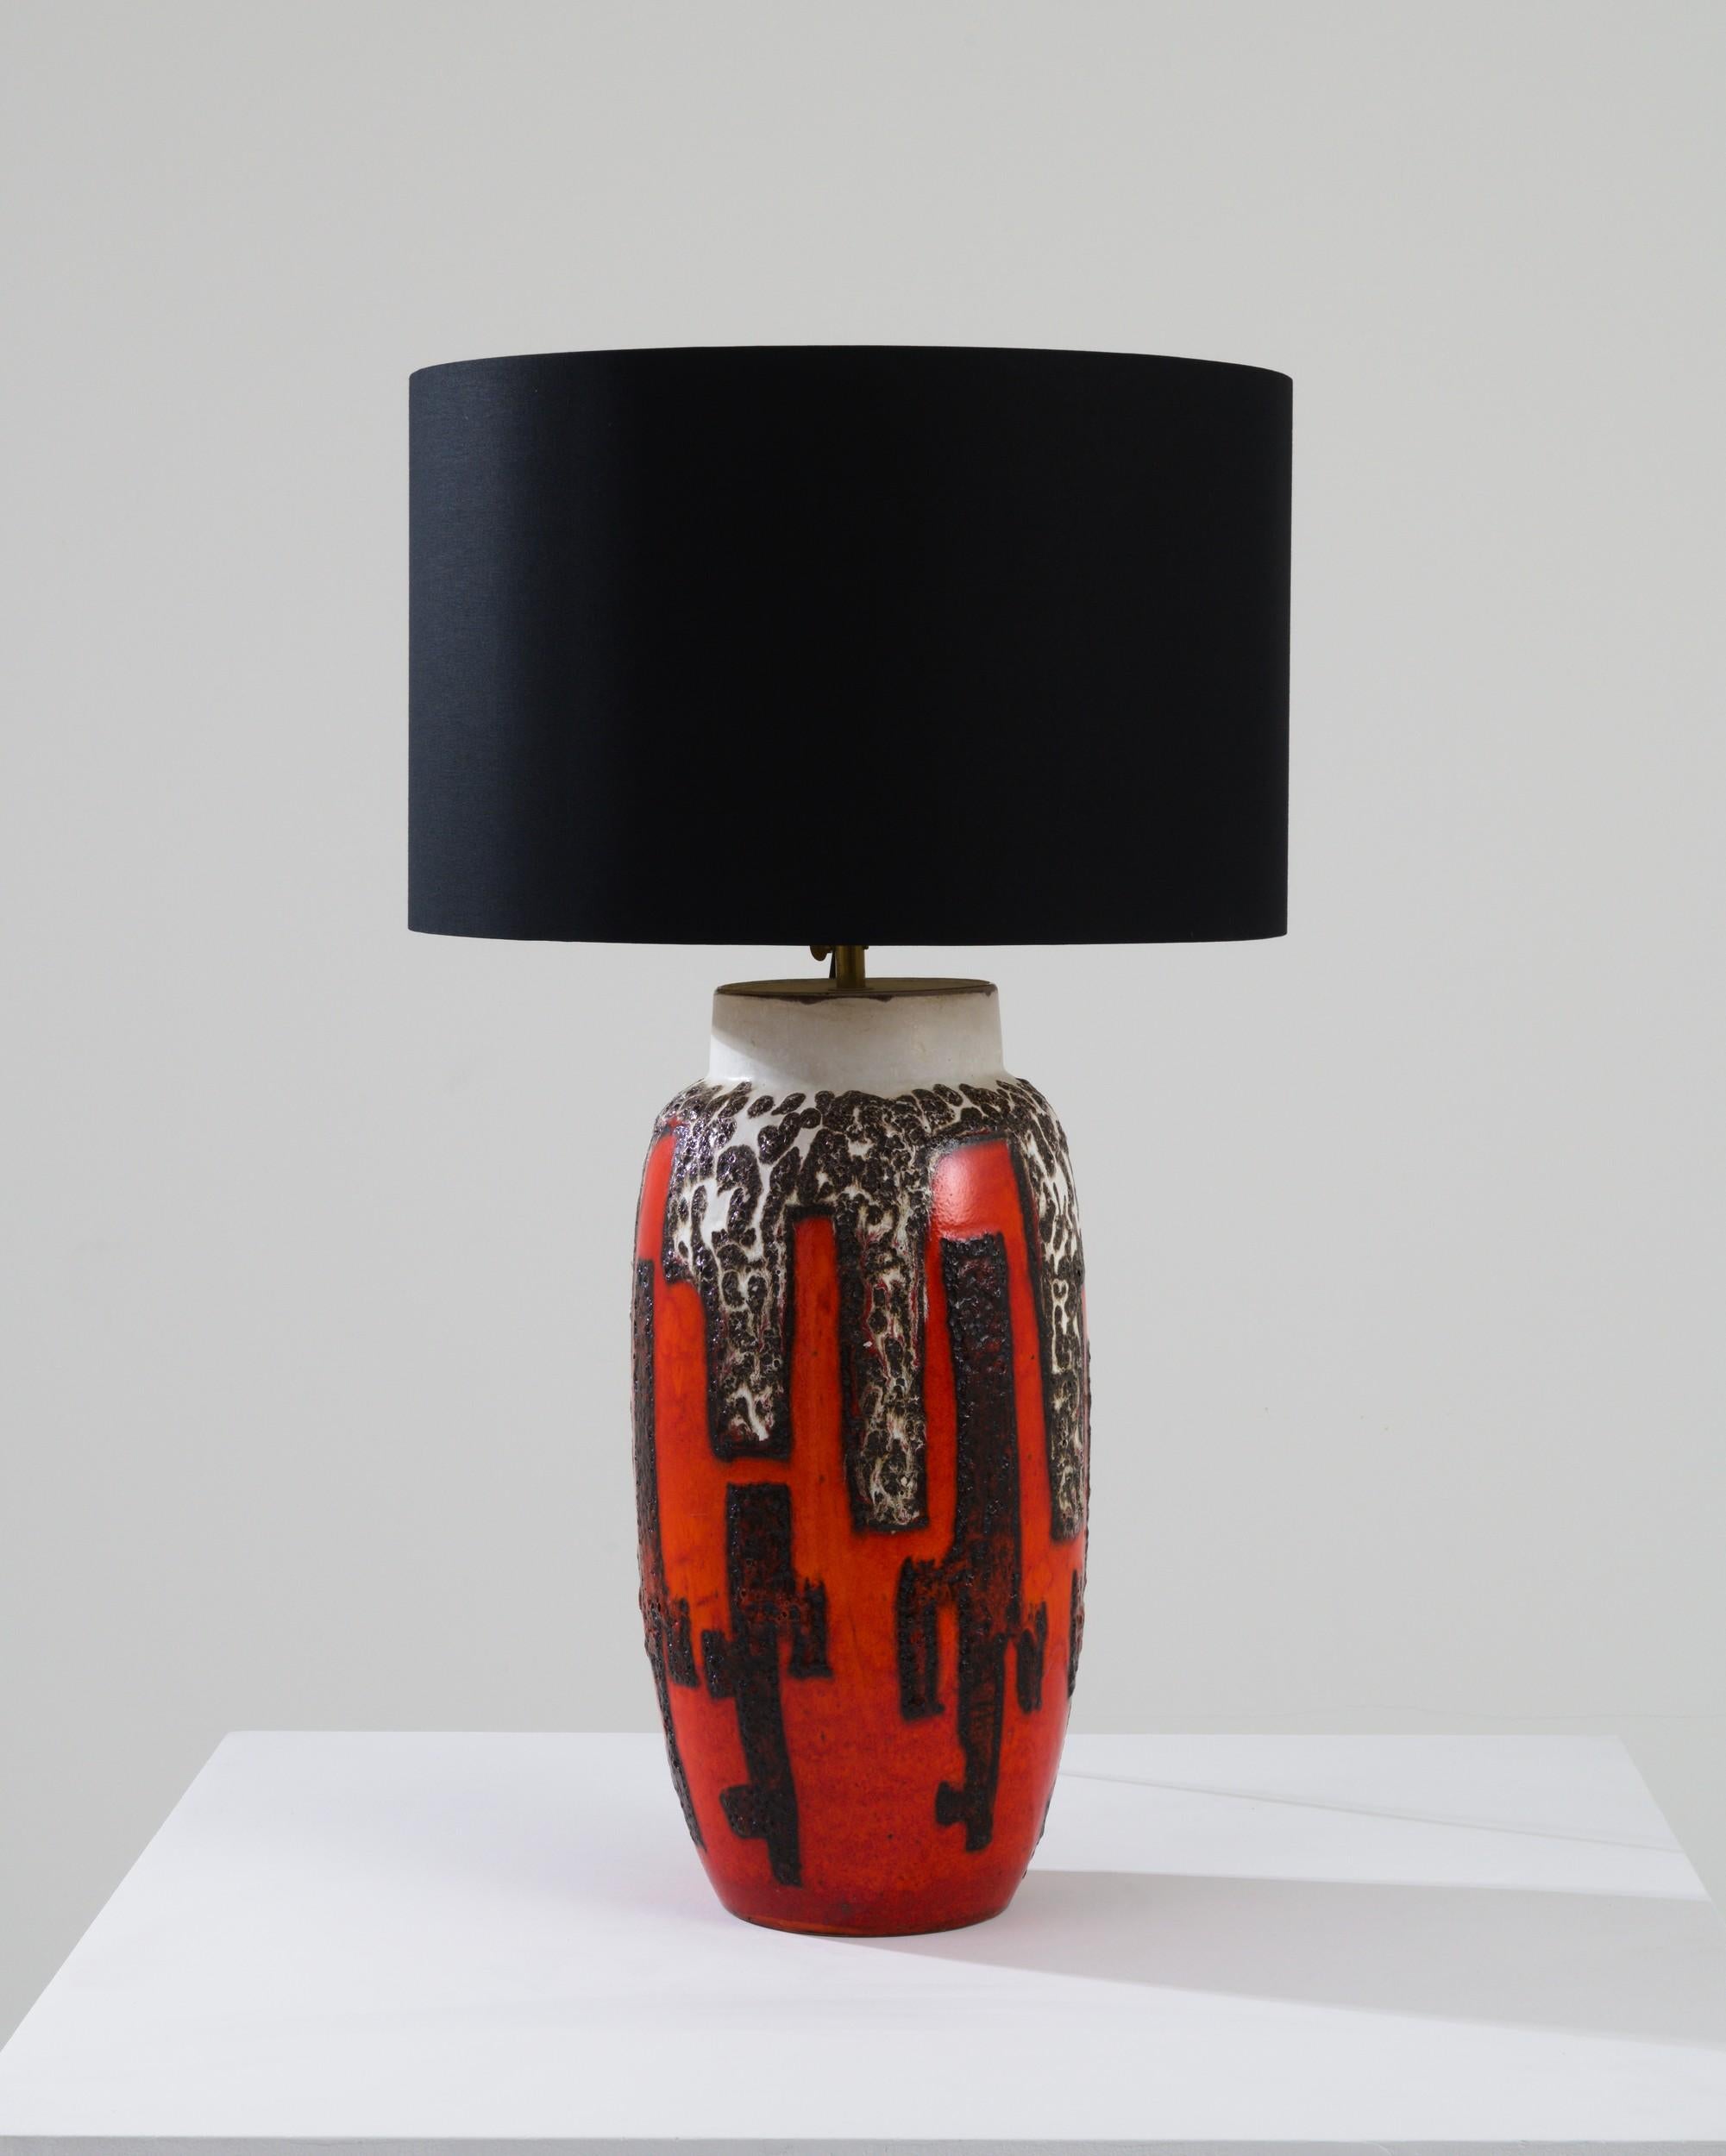 1960s German Ceramic Vase Table Lamp In Good Condition For Sale In High Point, NC